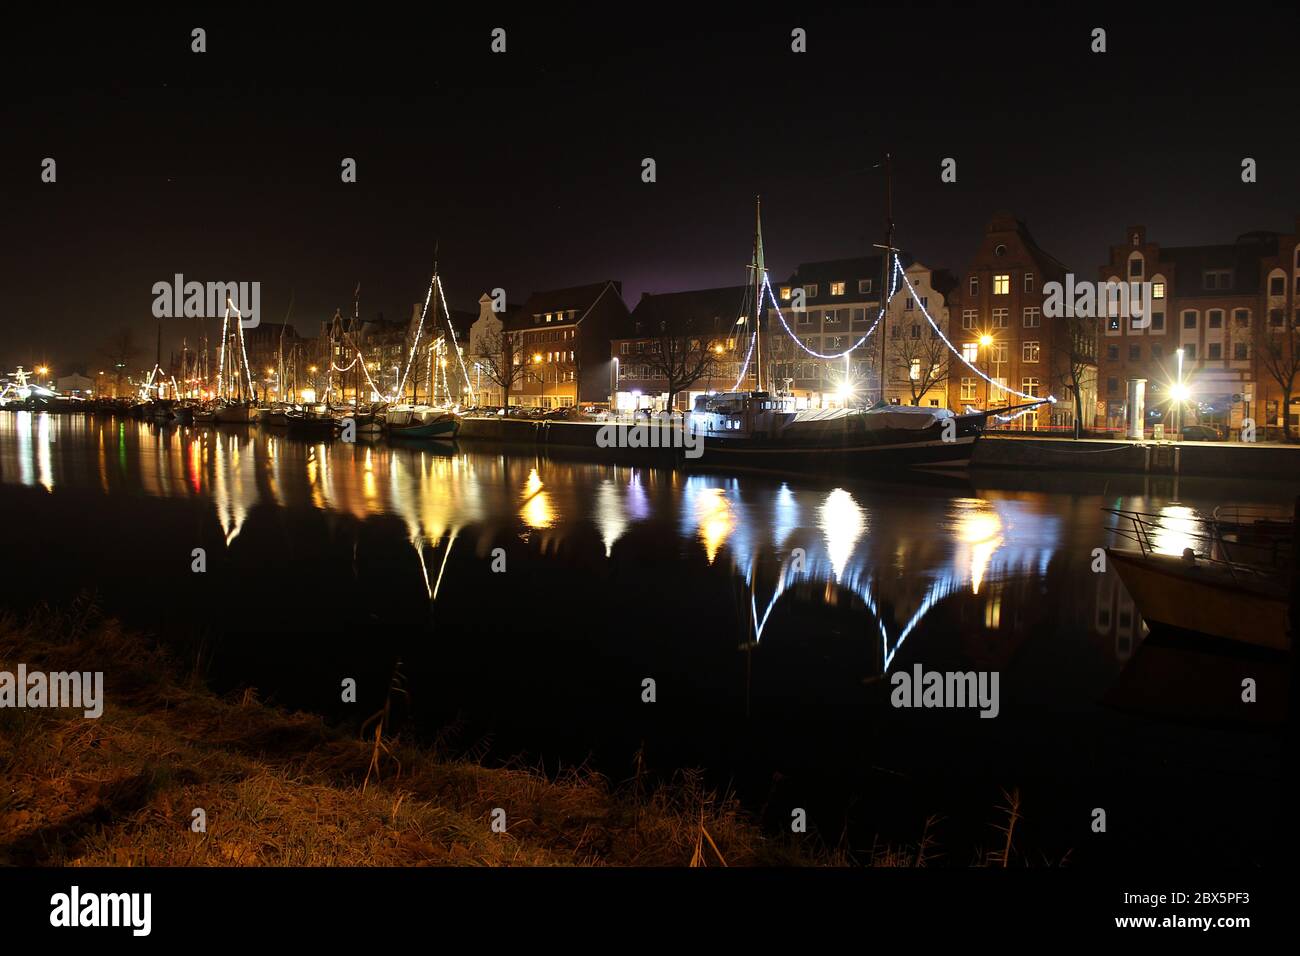 Luebeck, Germany - 2 Dezember 2016: View of Luebeck and the river Trave at night. Photo taken at 'An der Untertrave', ships decorated with lights. Stock Photo